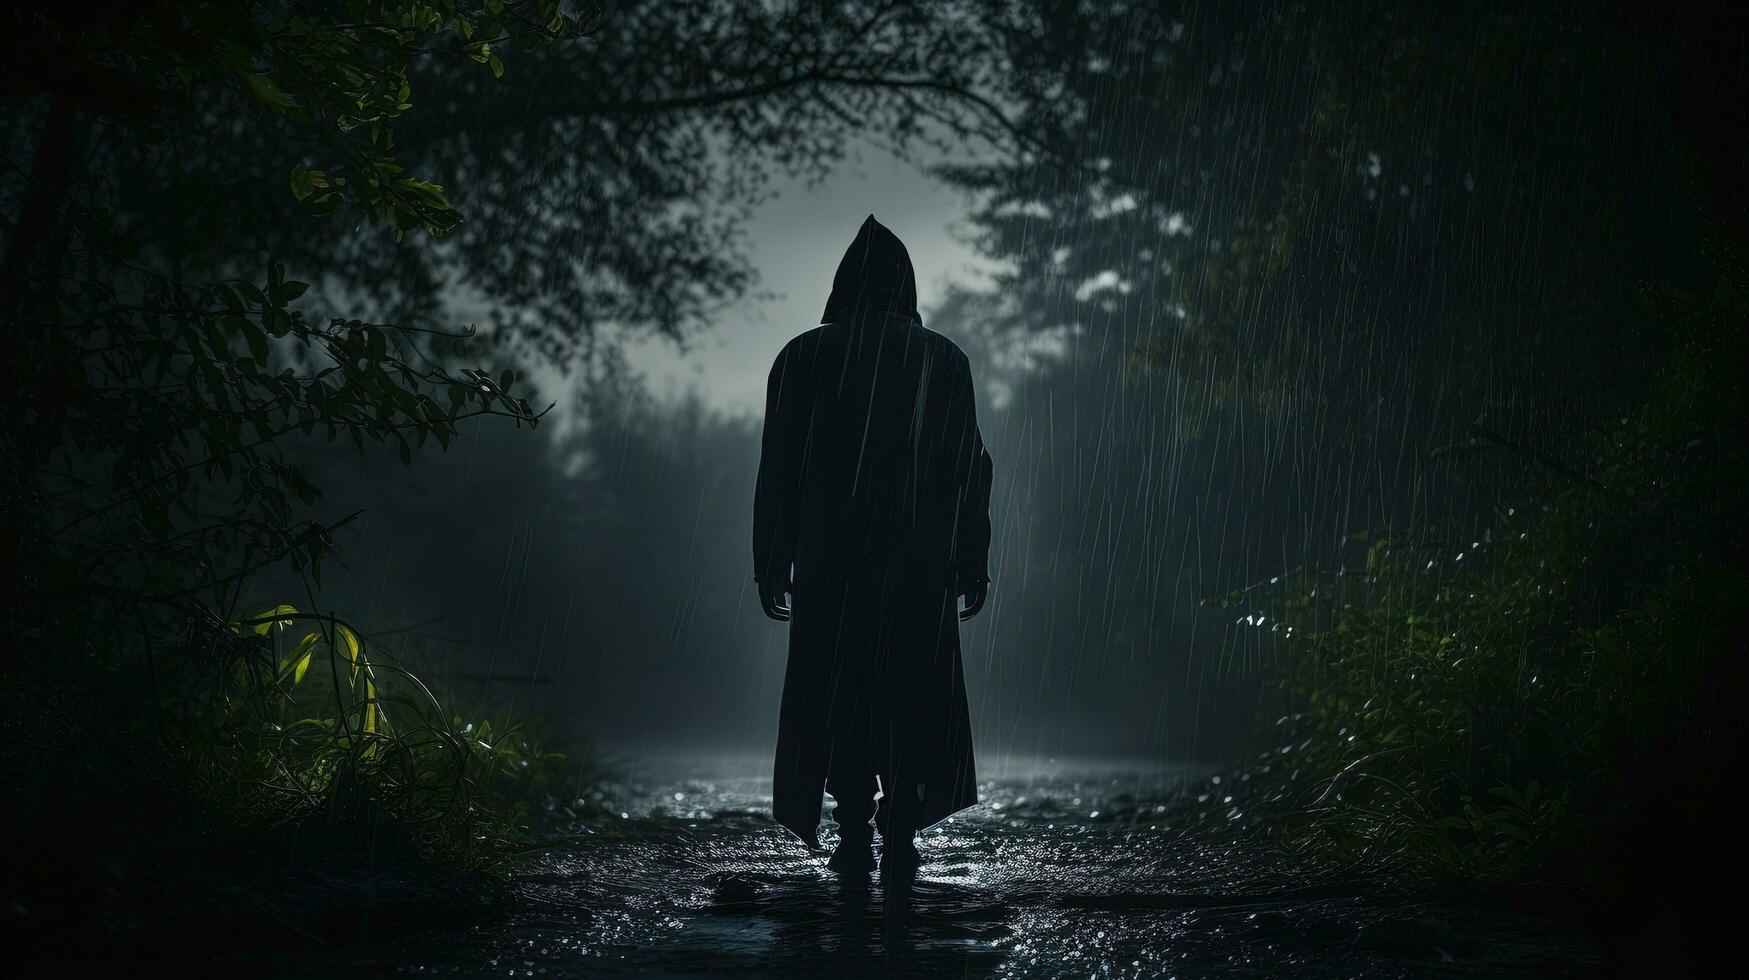 Observing a rainy country path gazing at a mysterious figure wearing a hood from behind. silhouette concept photo